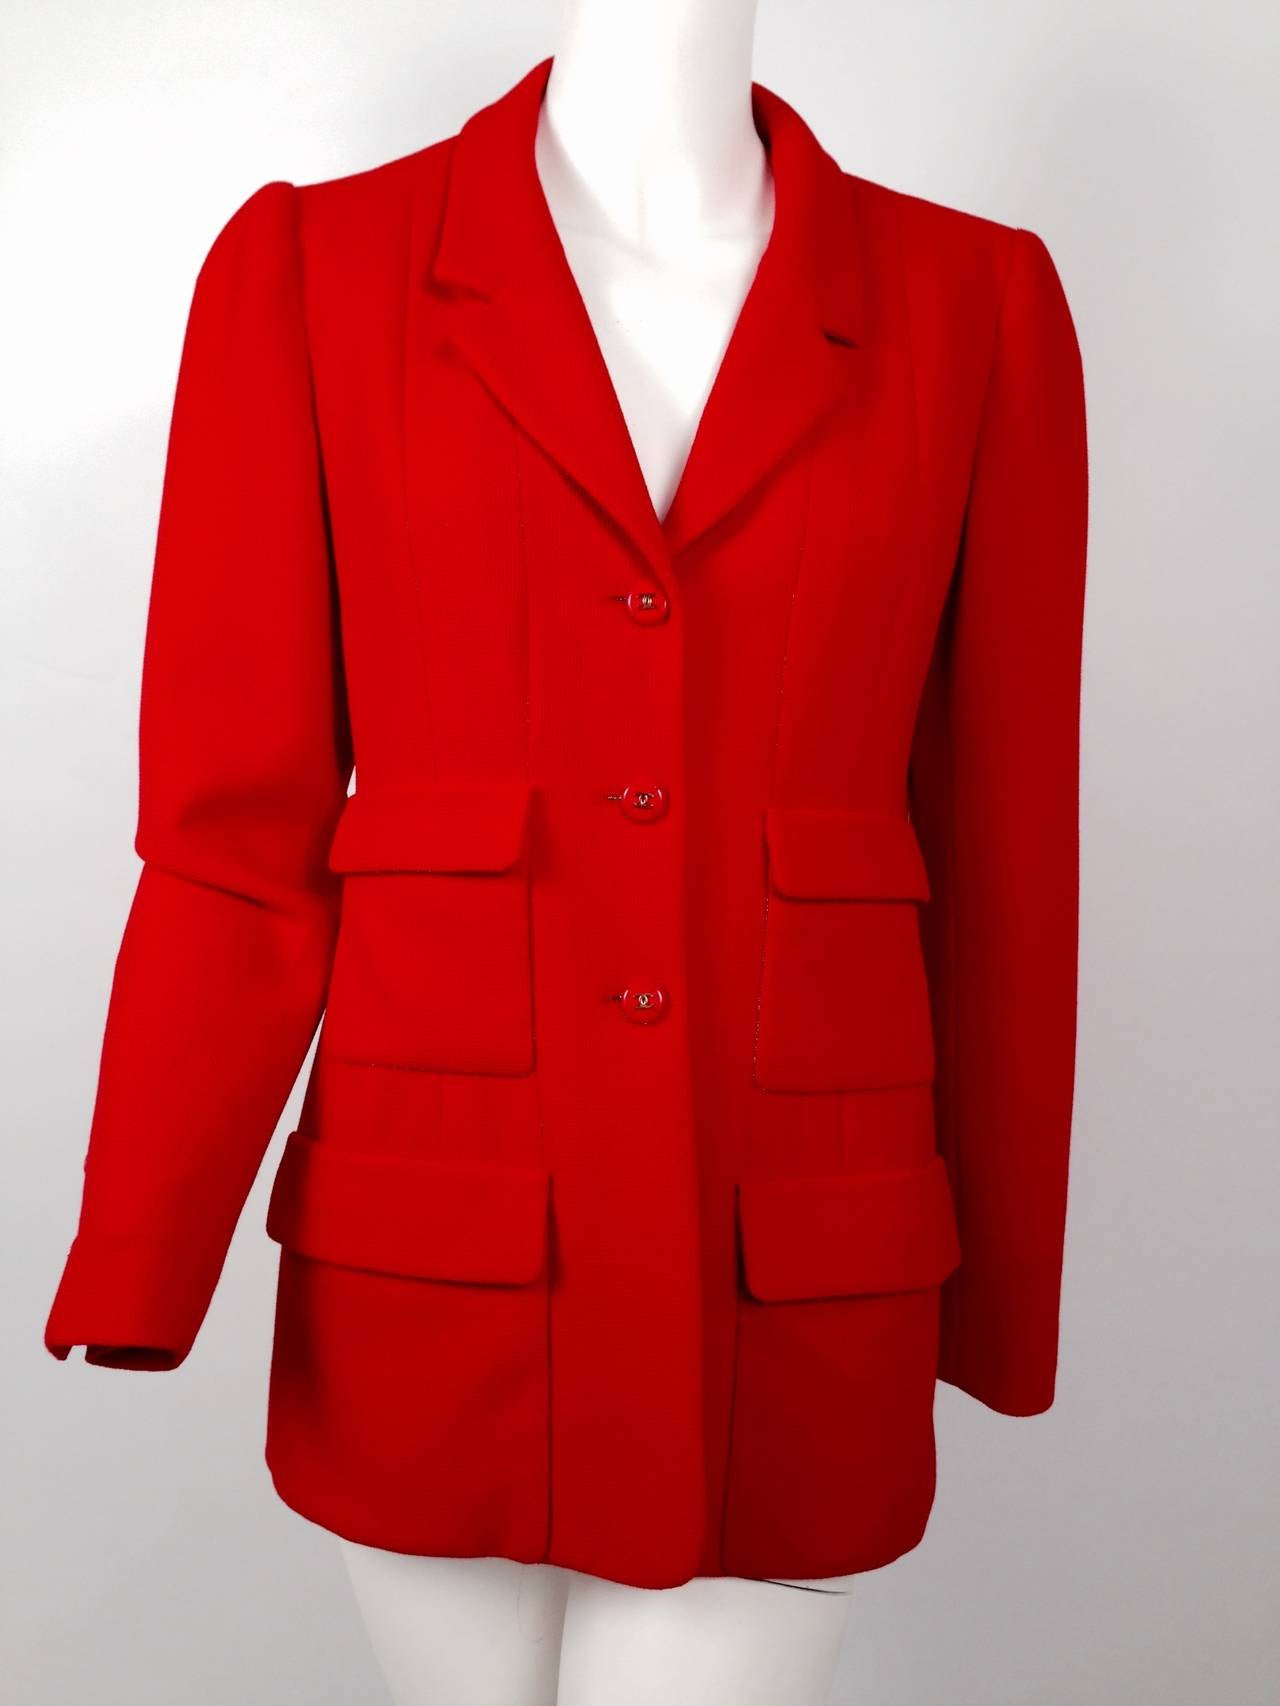 Chanel's red pique jacket is sporty AND elegant!  Decidedly Coco, jacket celebrates a relaxed but tailored silhouette.  Features notched lapel, four front patch pockets with flaps, double 